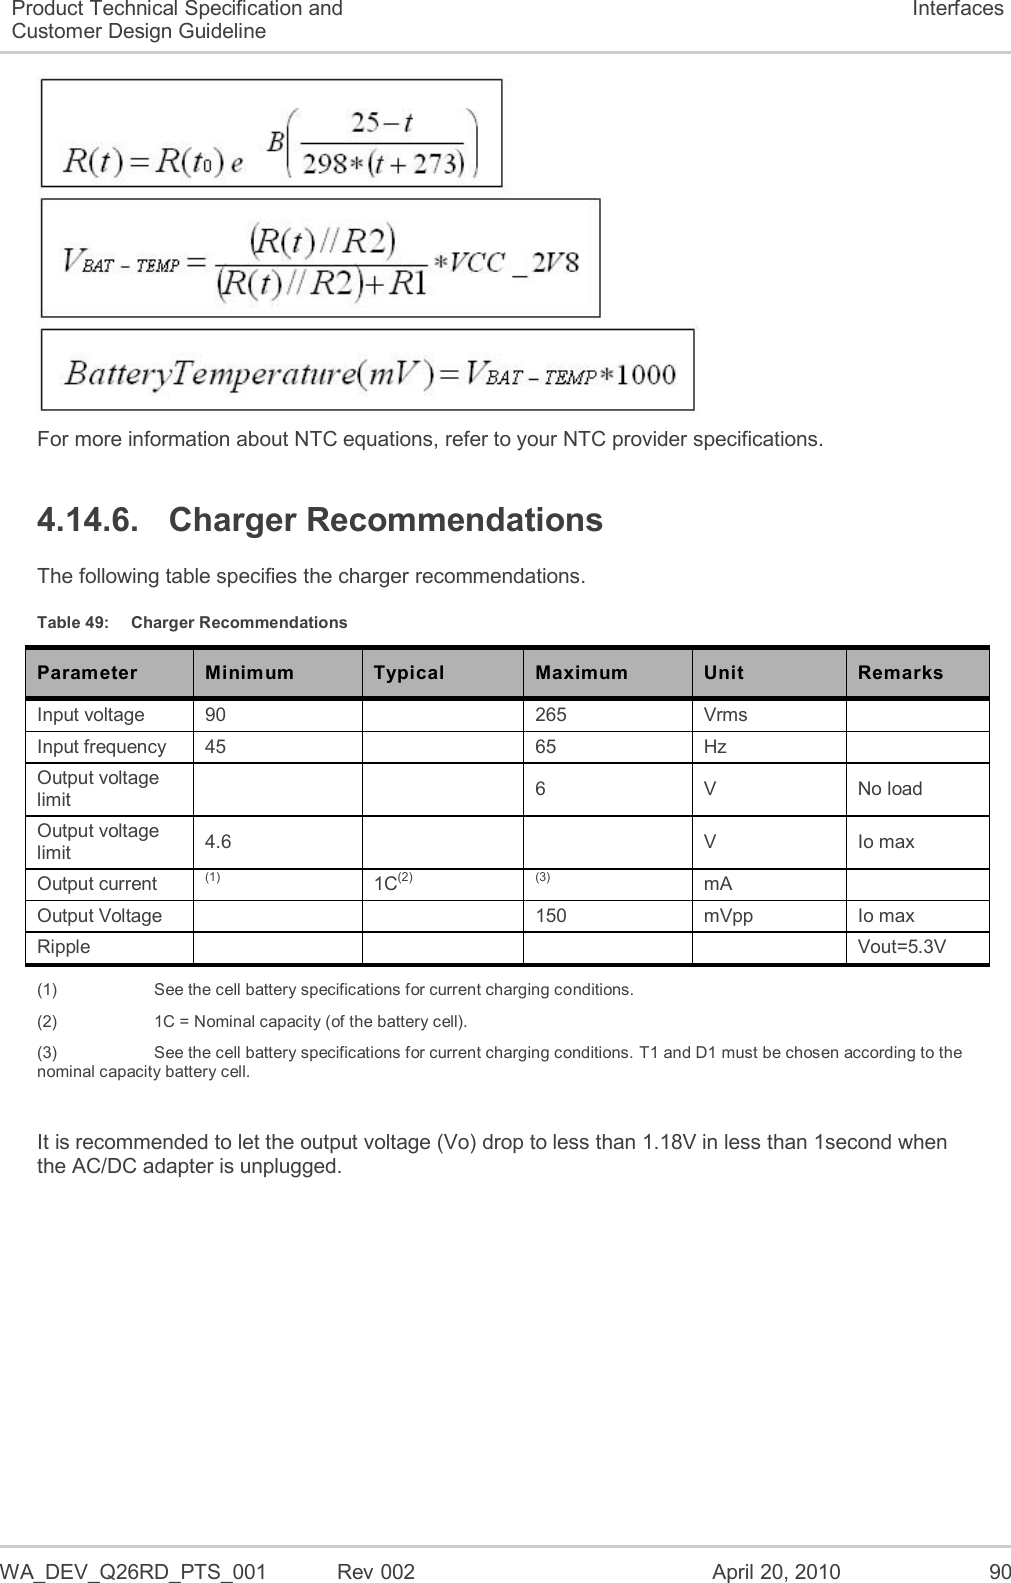  WA_DEV_Q26RD_PTS_001  Rev 002  April 20, 2010 90 Product Technical Specification and Customer Design Guideline Interfaces  For more information about NTC equations, refer to your NTC provider specifications. 4.14.6.  Charger Recommendations The following table specifies the charger recommendations. Table 49:  Charger Recommendations Parameter Minimum Typical Maximum Unit Remarks Input voltage 90   265 Vrms   Input frequency 45   65 Hz   Output voltage limit     6 V No load Output voltage limit 4.6     V Io max Output current (1) 1C(2) (3) mA   Output Voltage     150 mVpp Io max Ripple     Vout=5.3V (1)    See the cell battery specifications for current charging conditions. (2)    1C = Nominal capacity (of the battery cell). (3)    See the cell battery specifications for current charging conditions. T1 and D1 must be chosen according to the nominal capacity battery cell.  It is recommended to let the output voltage (Vo) drop to less than 1.18V in less than 1second when the AC/DC adapter is unplugged. 